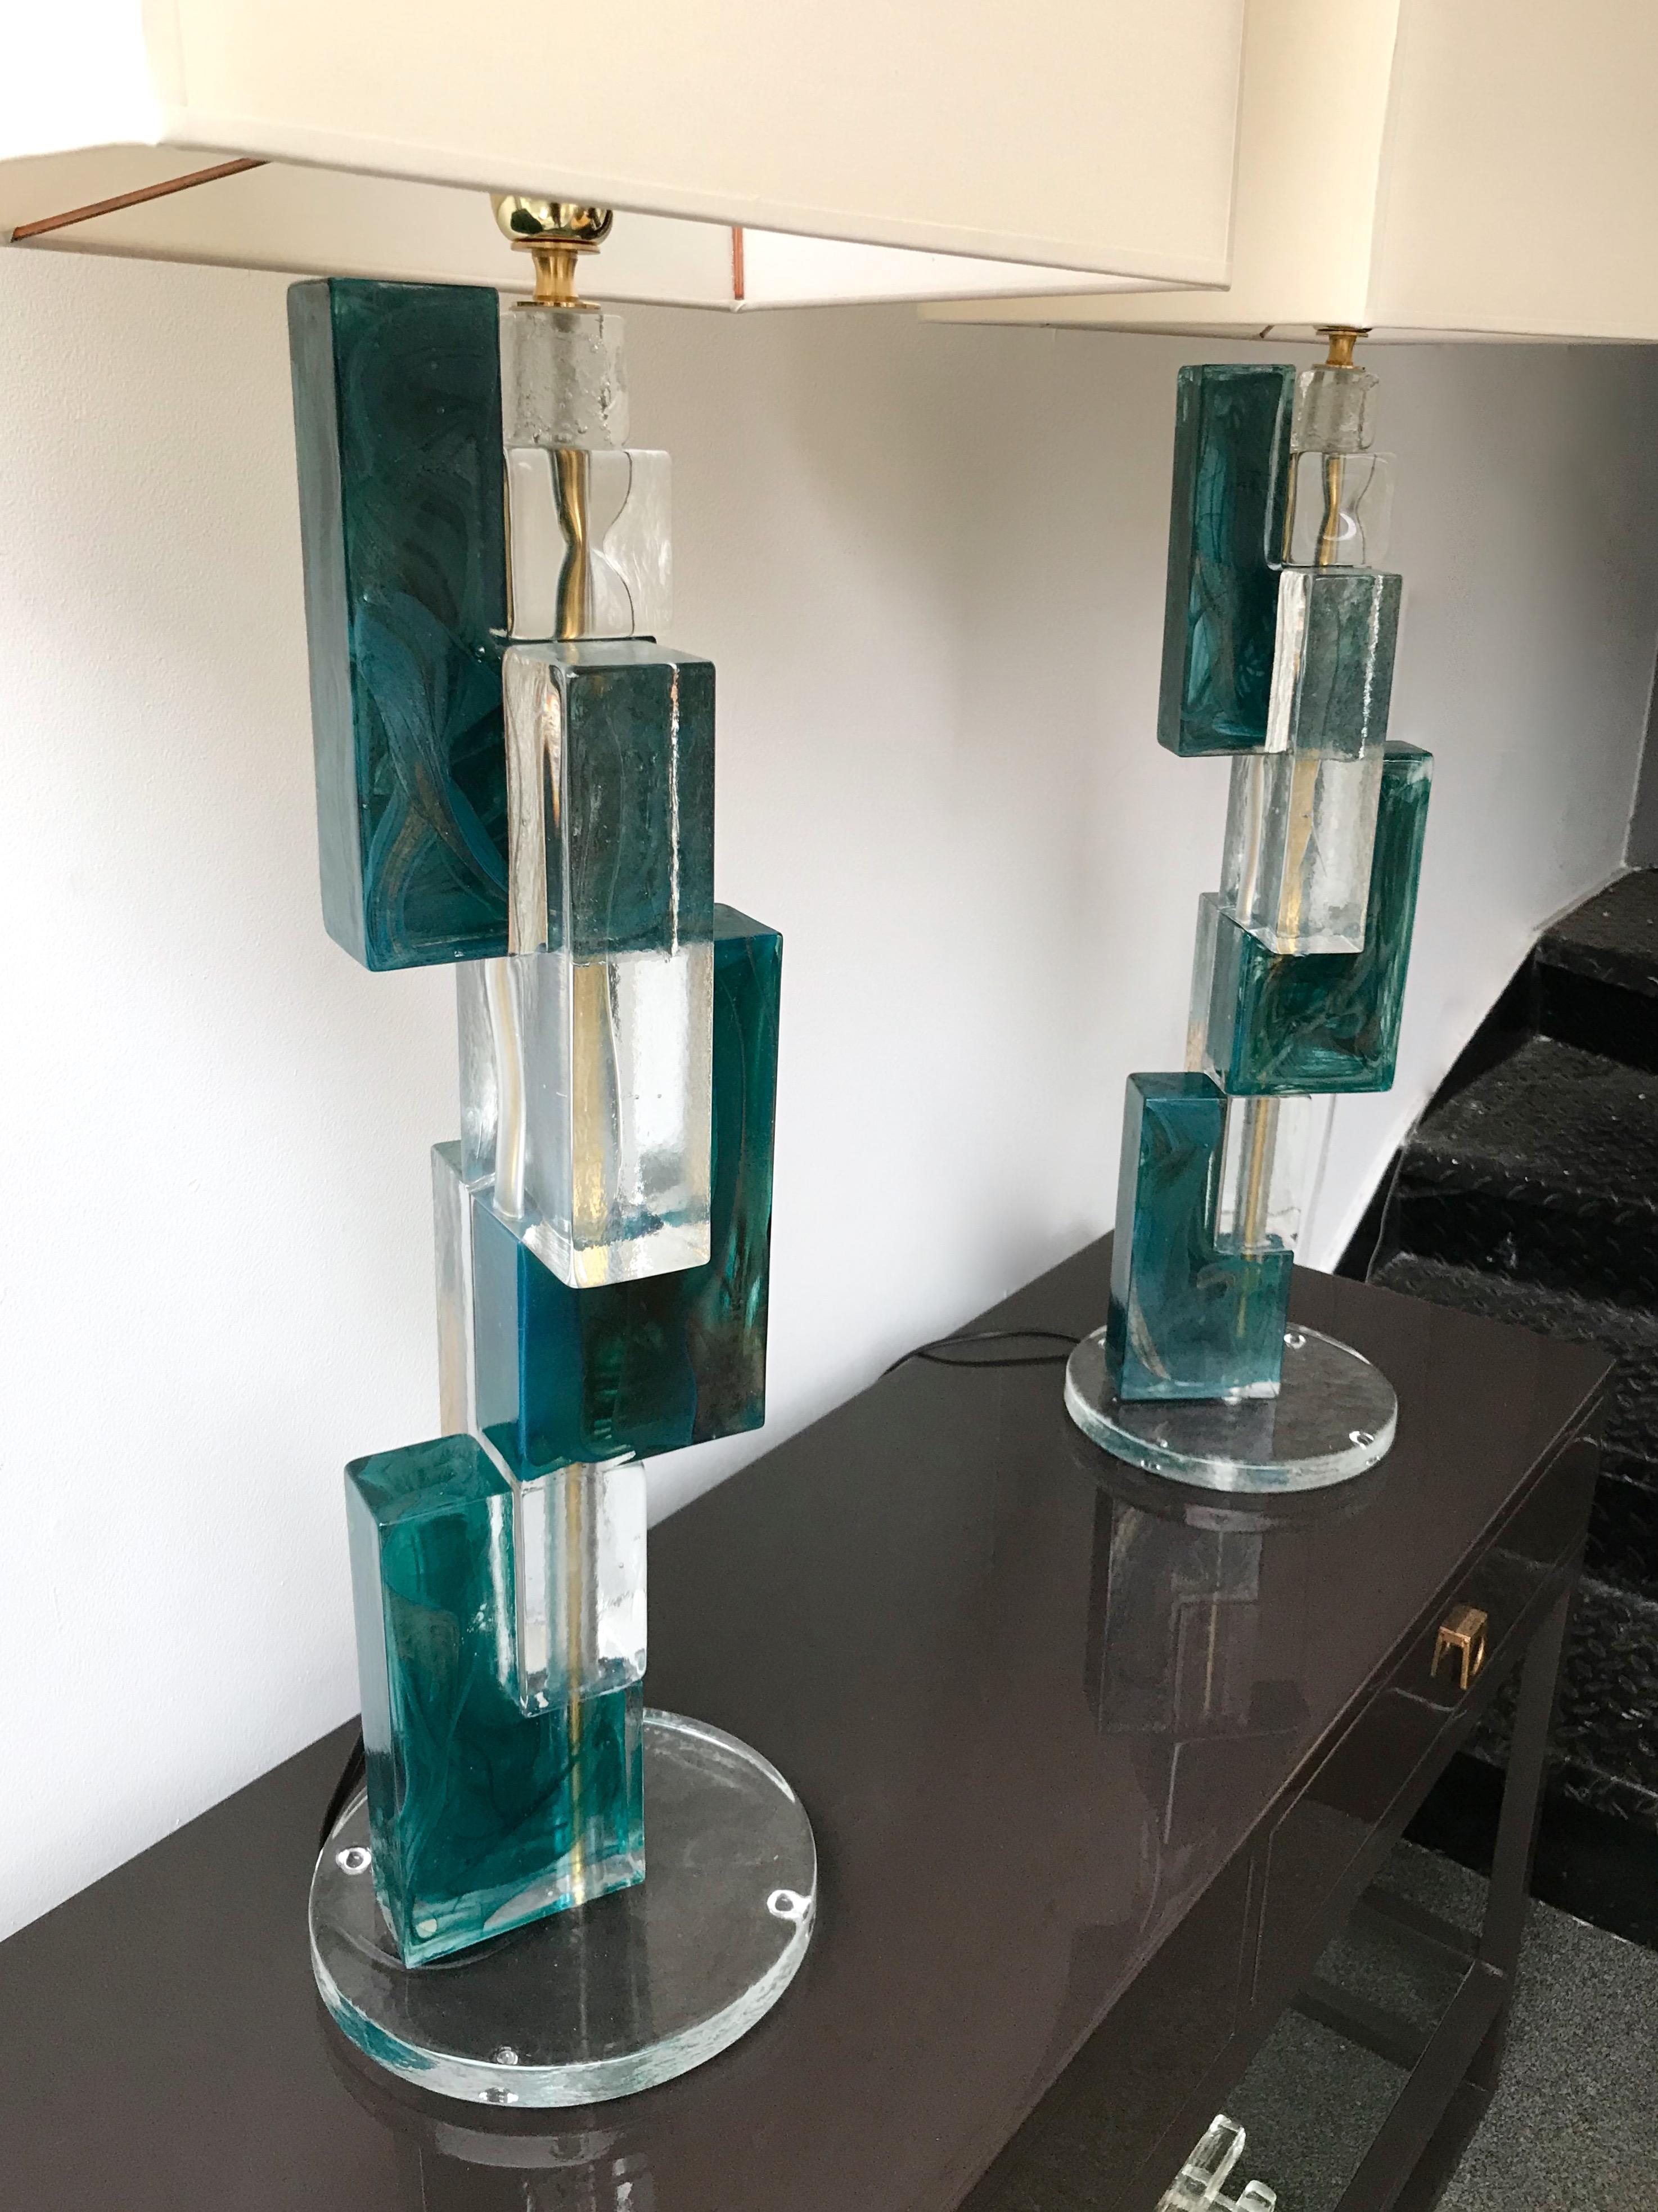 Huge pair of contemporary table lamps cubic pressed Murano glass block and brass elements. Few exclusive production from a small Italian design workshop. In the style of Mazzega, Poliarte, Venini, Vistosi, Carlo Aldo Nason.

Measure: Height top of